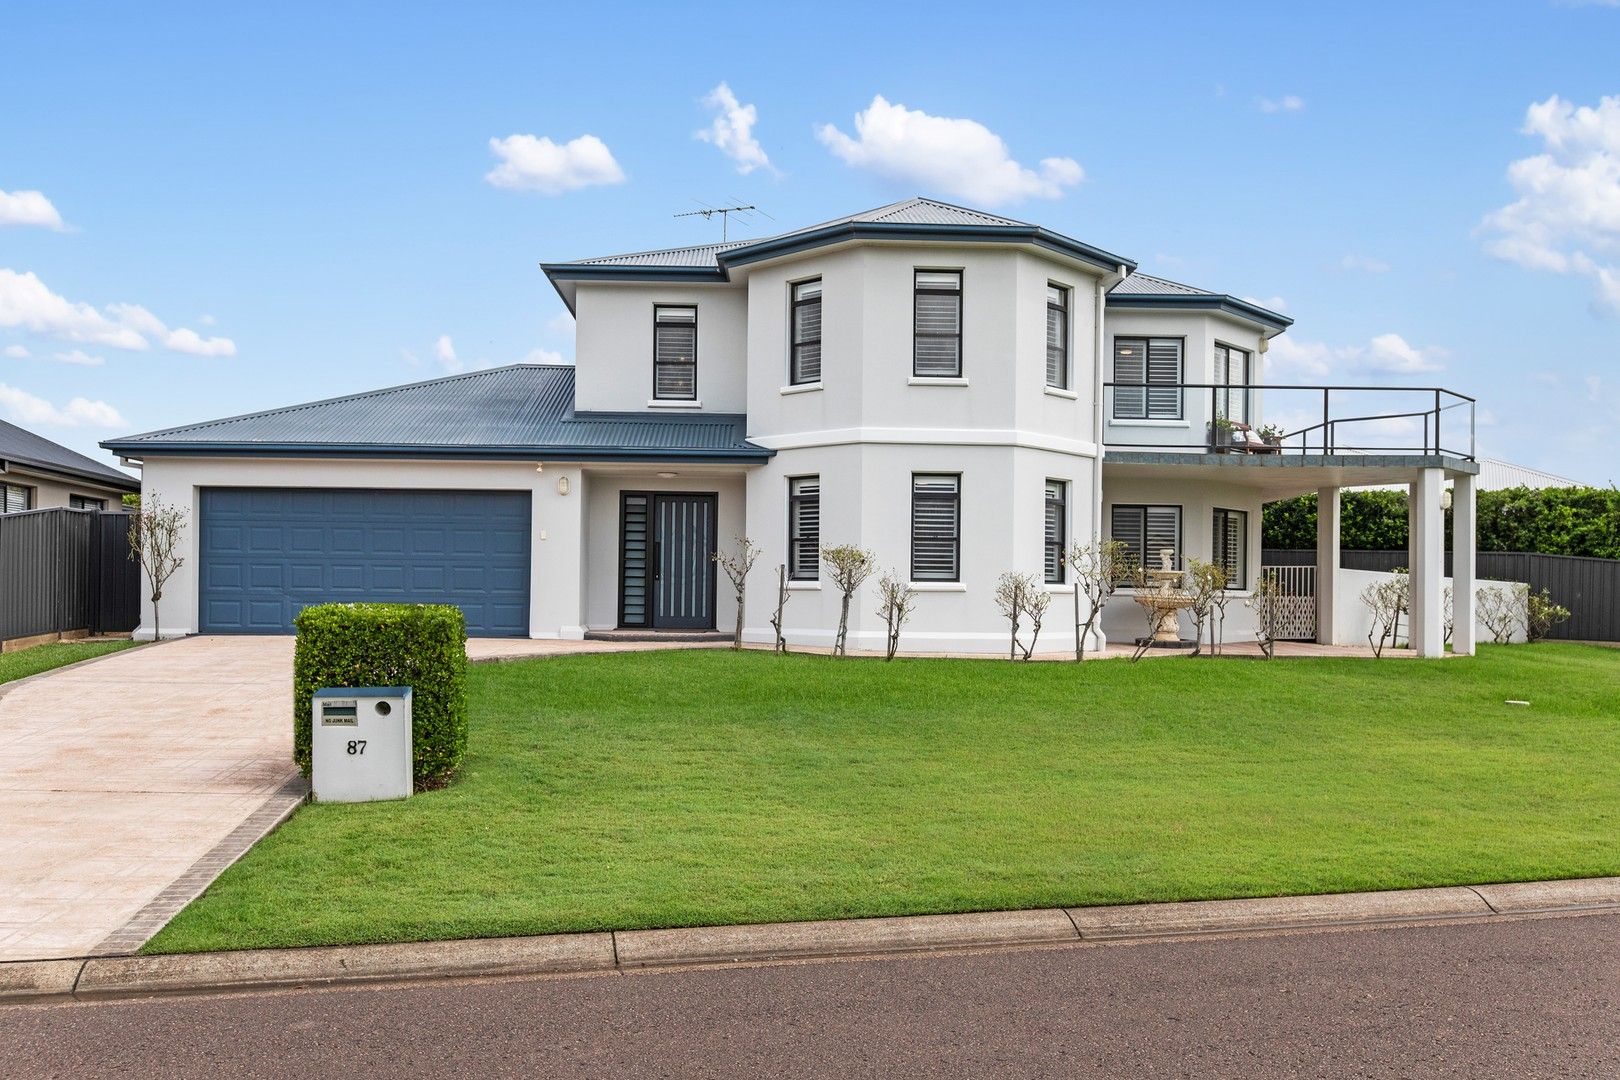 4 bedrooms House in 87 Wilton Drive EAST MAITLAND NSW, 2323